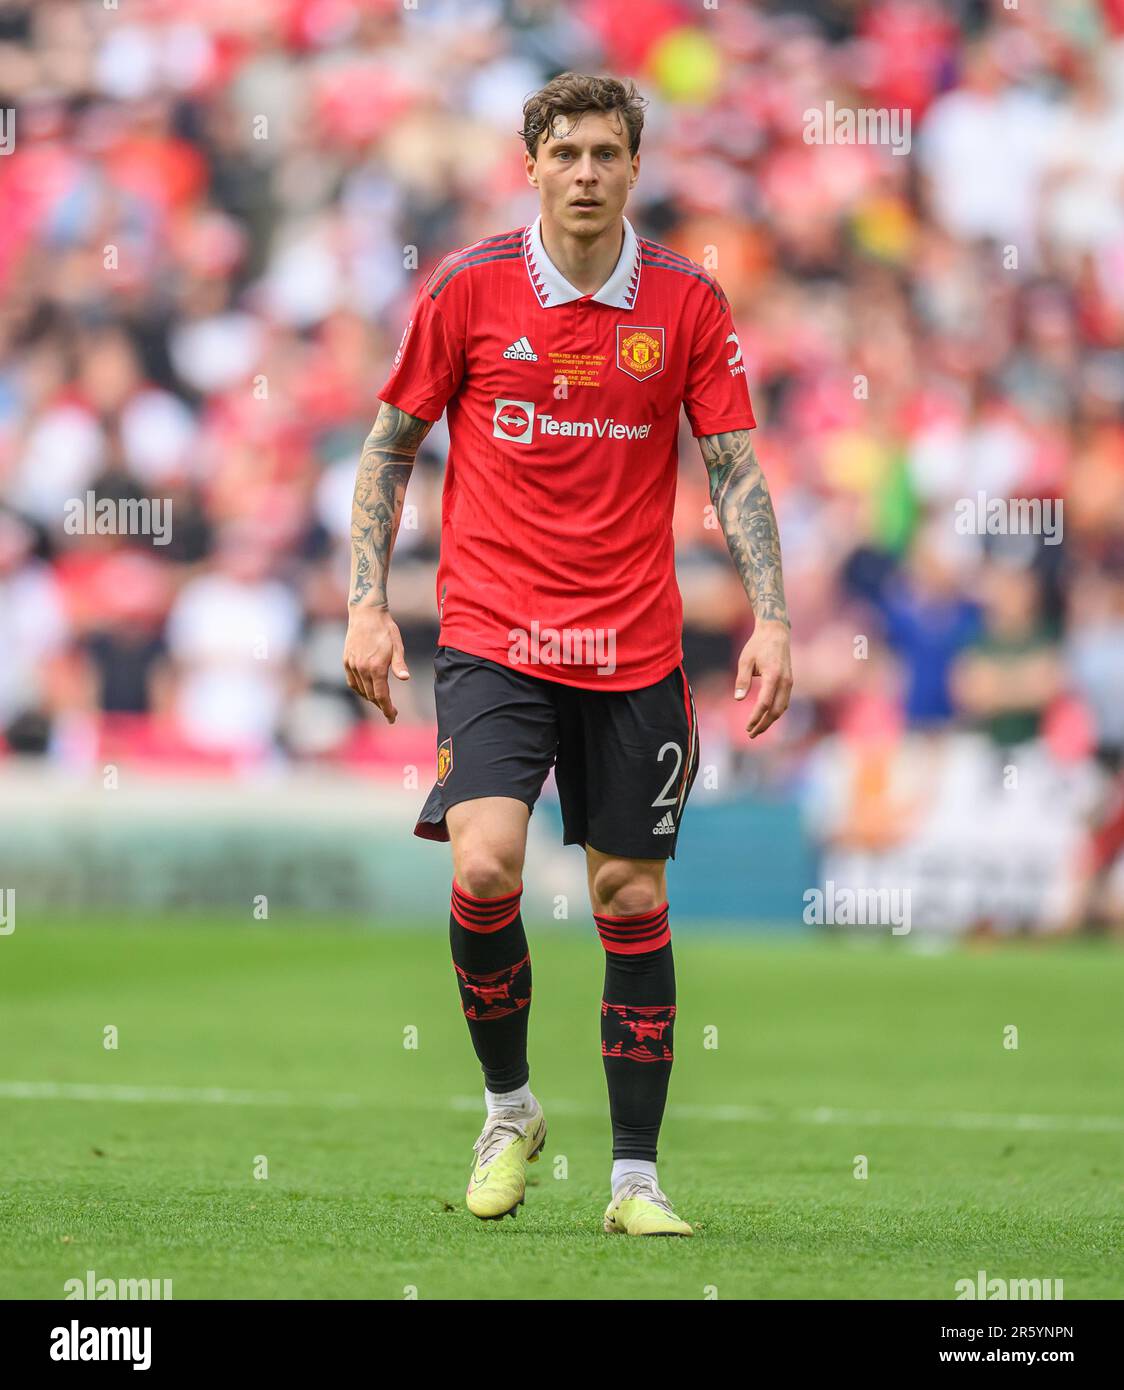 03 Jun 2023 - Manchester City v Manchester United - Emirates FA Cup Final - Wembley Stadium  Manchester United's Victor Lindelof during the 2023 FA Cup Final. Picture : Mark Pain / Alamy Live News Stock Photo